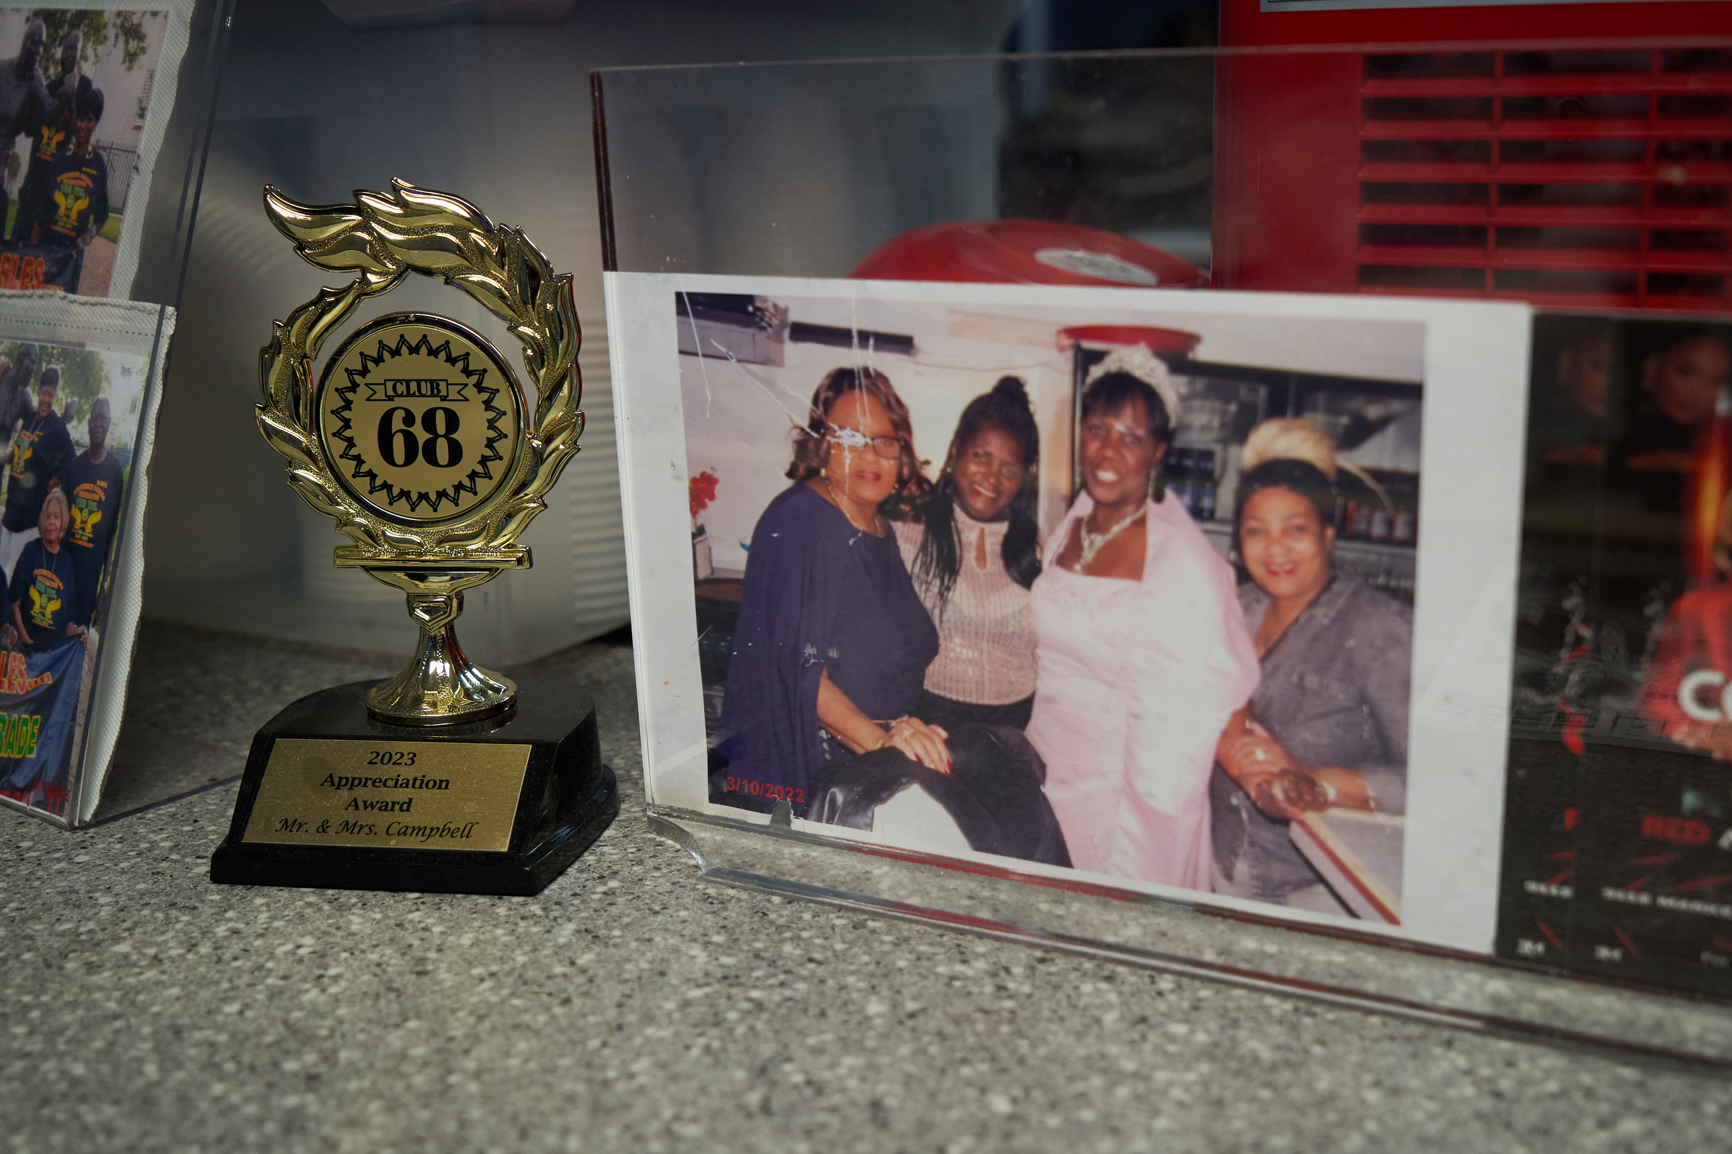 A trophy sits on the bar among photos inside Club 68, which is considered pivotal in the Black community for the outreach, community work and services it provides